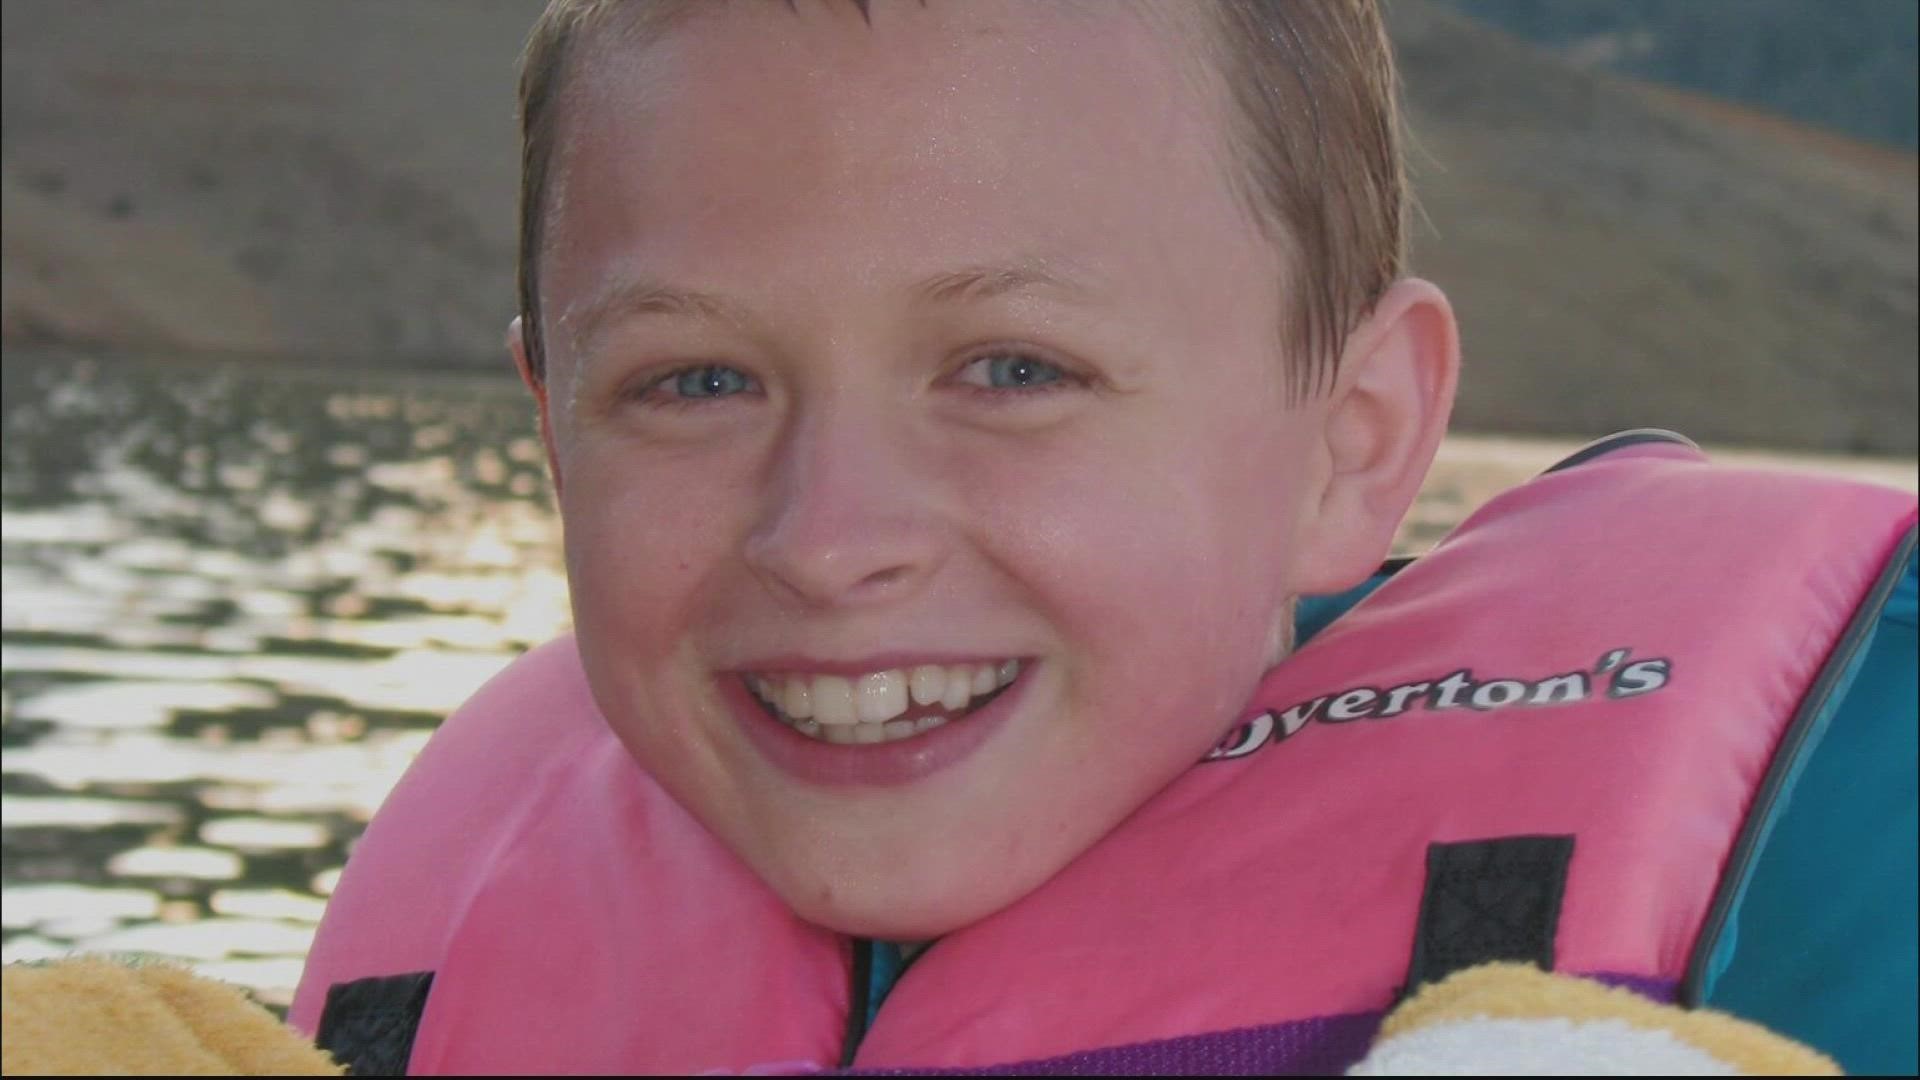 The Sam Day Buddy Run in Beaverton is back, raising money for childhood cancer research. The run is named after a 15-year-old boy who died of cancer in 2016.